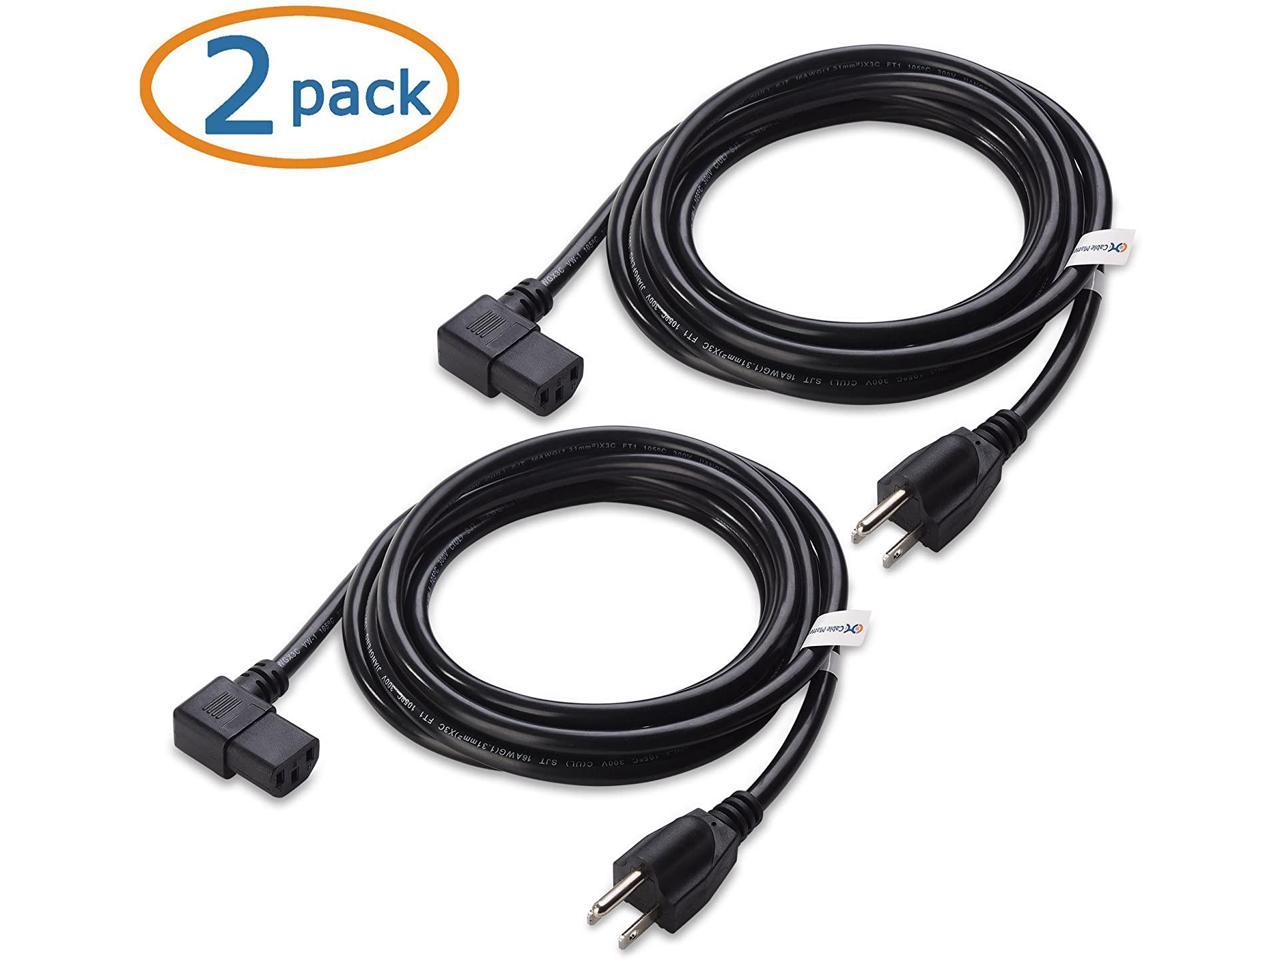 NEMA 5-15P to Angled IEC C13 10 Feet Power Cable Cable Matters 2-Pack 16 AWG Low Profile Right Angle Power Cord 